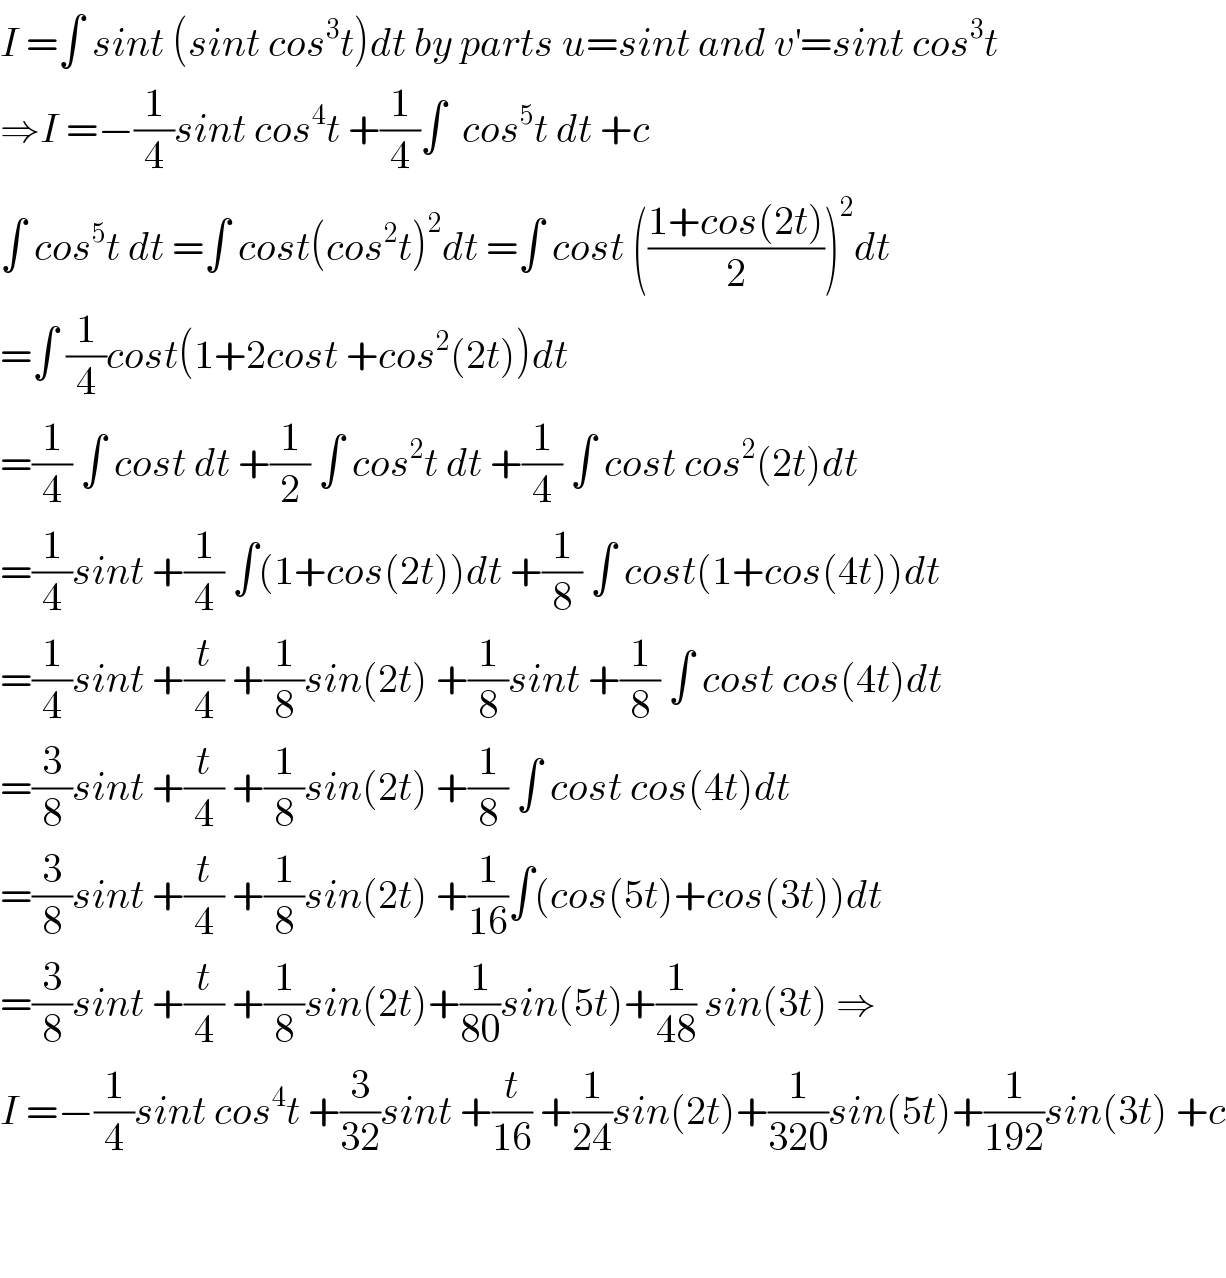 I =∫ sint (sint cos^3 t)dt by parts u=sint and v^′ =sint cos^3 t  ⇒I =−(1/4)sint cos^4 t +(1/4)∫  cos^5 t dt +c  ∫ cos^5 t dt =∫ cost(cos^2 t)^2 dt =∫ cost (((1+cos(2t))/2))^2 dt  =∫ (1/4)cost(1+2cost +cos^2 (2t))dt  =(1/4) ∫ cost dt +(1/2) ∫ cos^2 t dt +(1/4) ∫ cost cos^2 (2t)dt  =(1/4)sint +(1/4) ∫(1+cos(2t))dt +(1/8) ∫ cost(1+cos(4t))dt  =(1/4)sint +(t/4) +(1/8)sin(2t) +(1/8)sint +(1/8) ∫ cost cos(4t)dt  =(3/8)sint +(t/4) +(1/8)sin(2t) +(1/8) ∫ cost cos(4t)dt  =(3/8)sint +(t/4) +(1/8)sin(2t) +(1/(16))∫(cos(5t)+cos(3t))dt  =(3/8)sint +(t/4) +(1/8)sin(2t)+(1/(80))sin(5t)+(1/(48)) sin(3t) ⇒  I =−(1/4)sint cos^4 t +(3/(32))sint +(t/(16)) +(1/(24))sin(2t)+(1/(320))sin(5t)+(1/(192))sin(3t) +c      